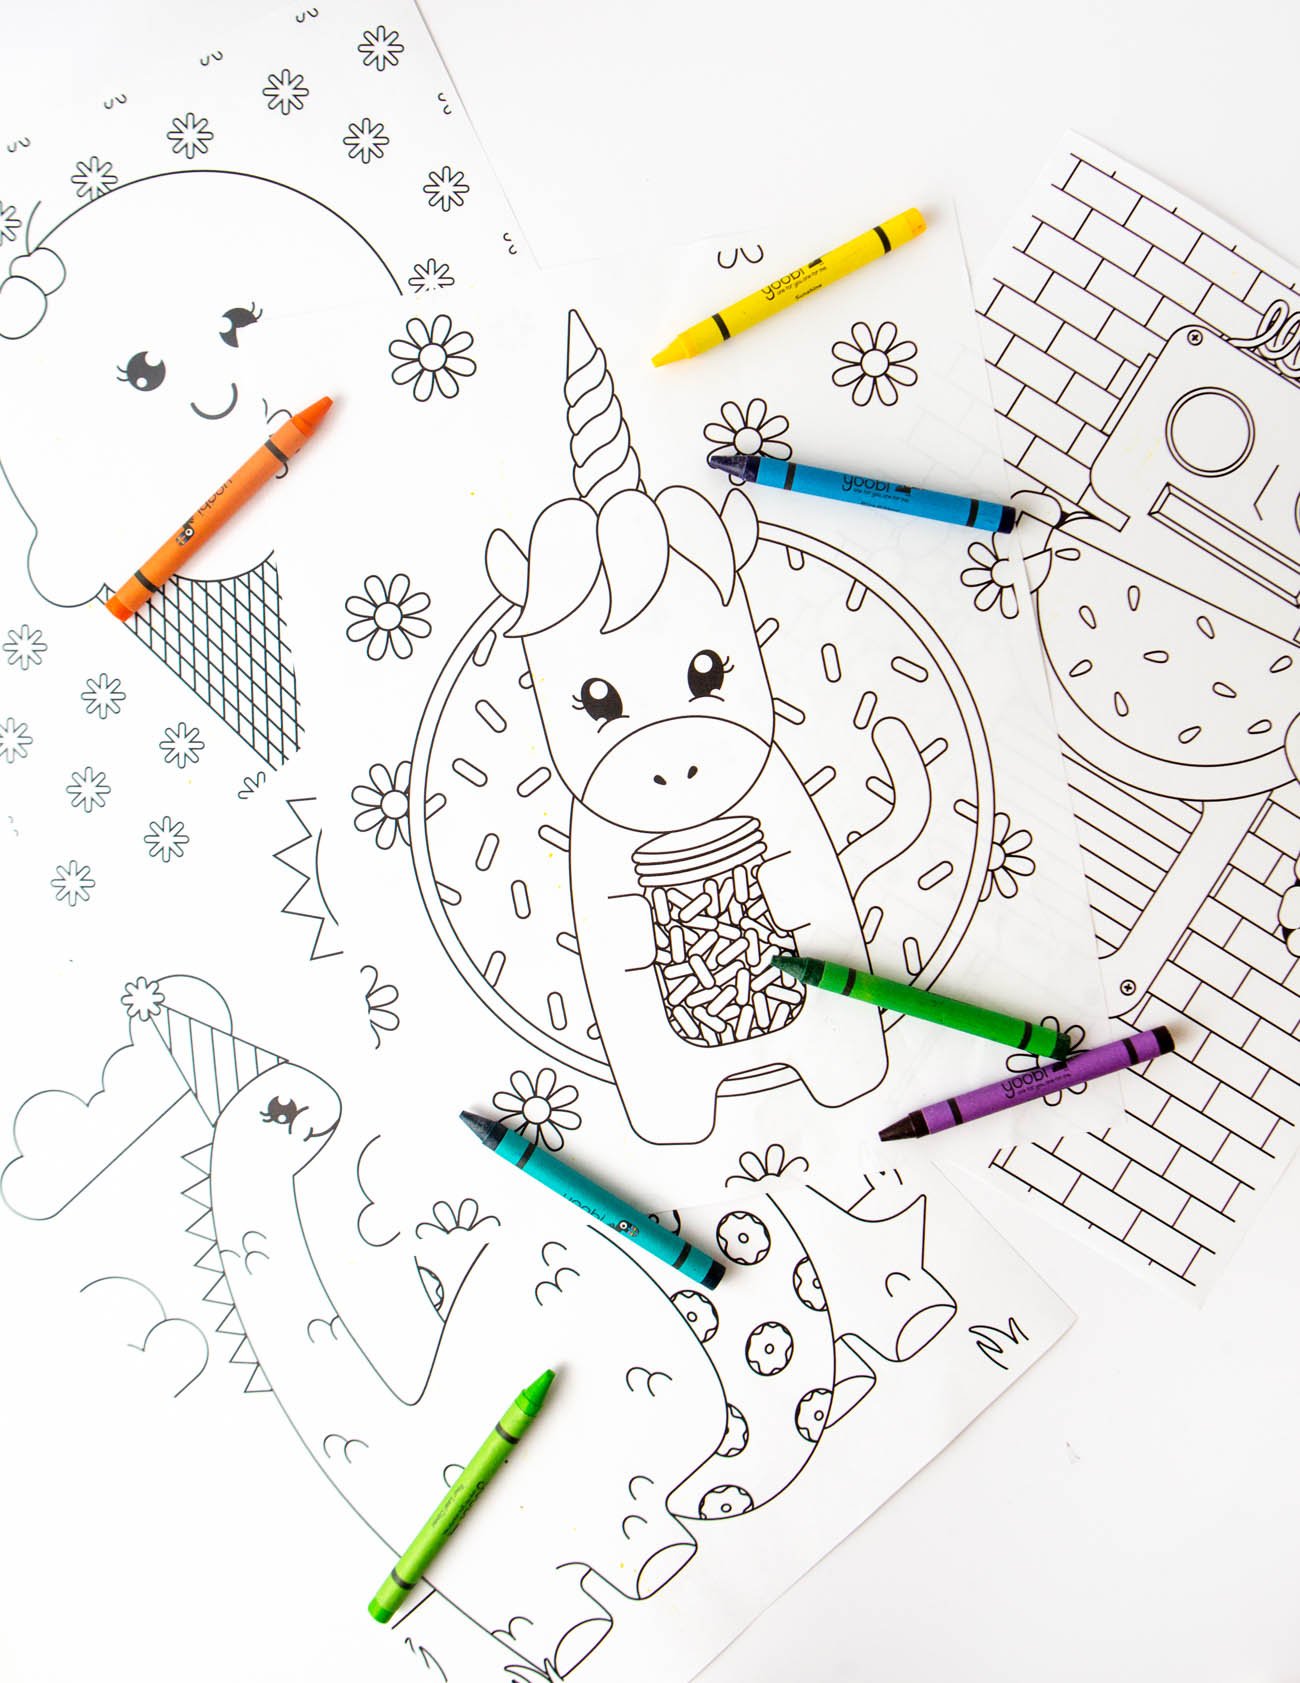 4 summer printable coloring pages for kids - unicorn, ice cream, robot, and dinosaur!